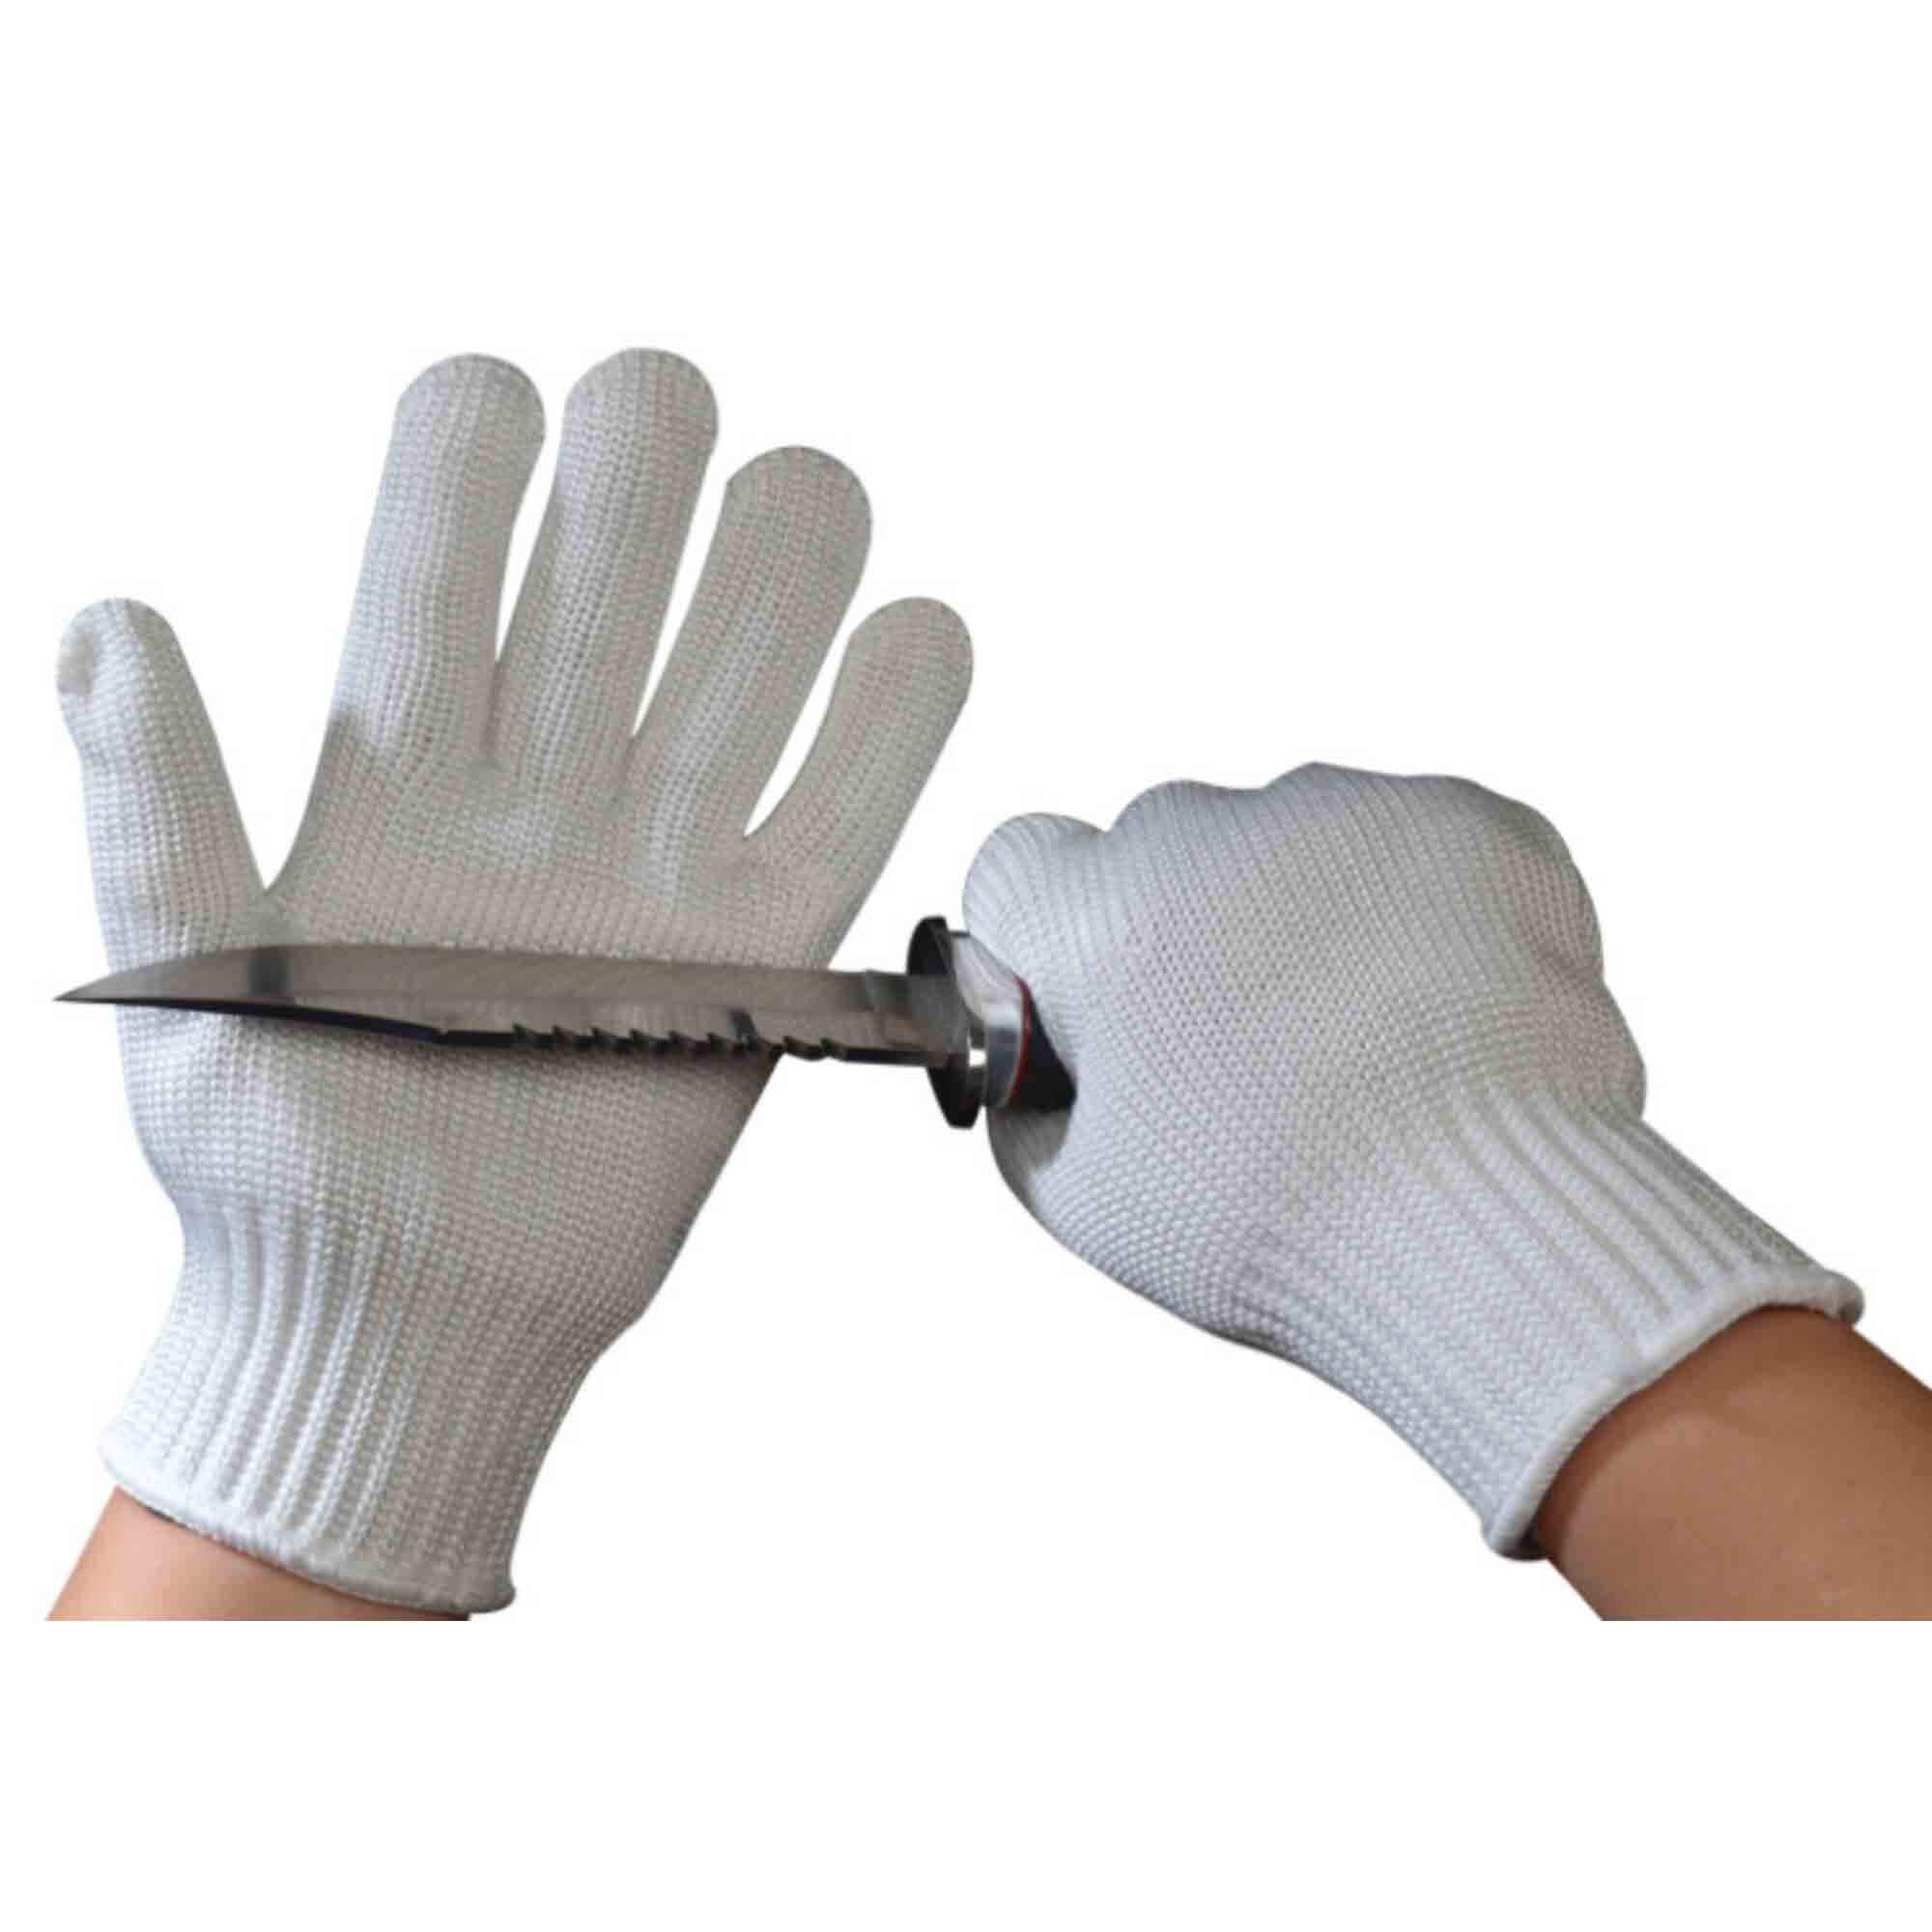 Cut-proof gloves